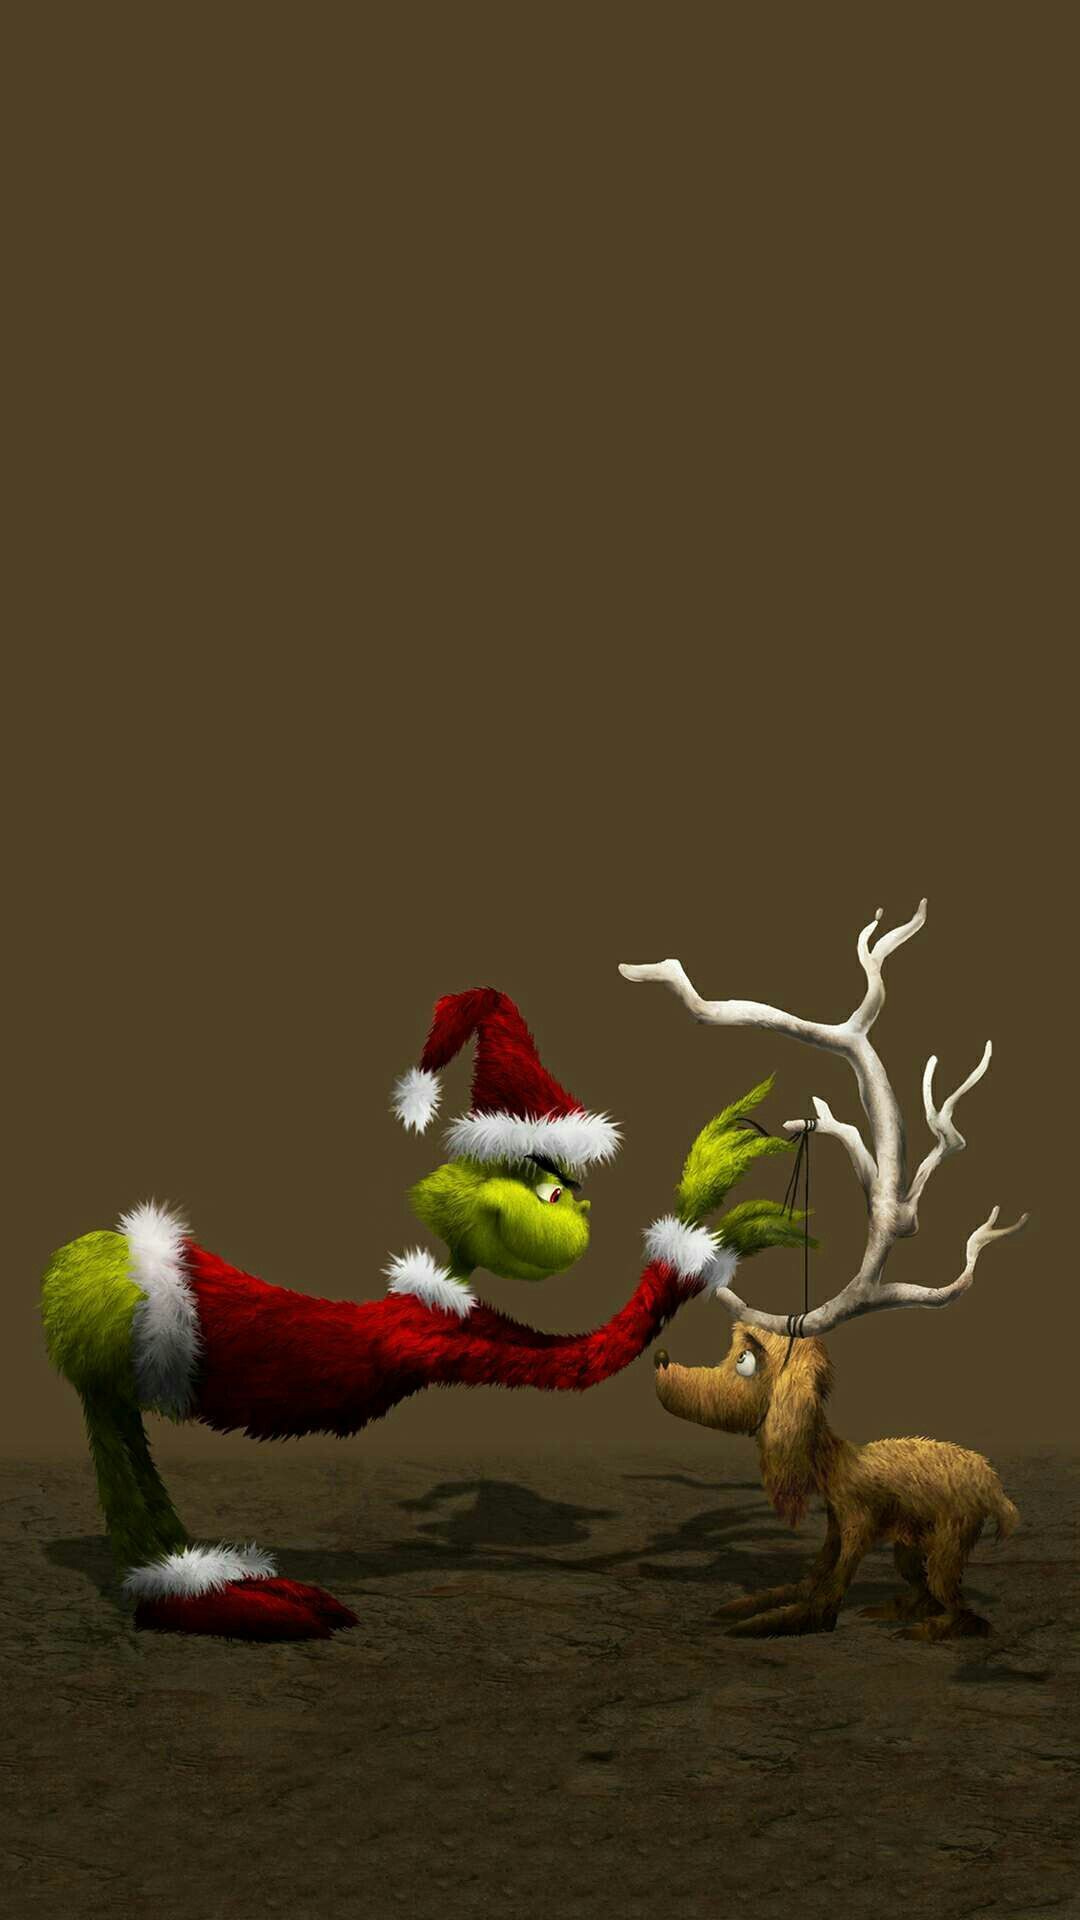 50+ Grinch Wallpaper Iphone Funny 20